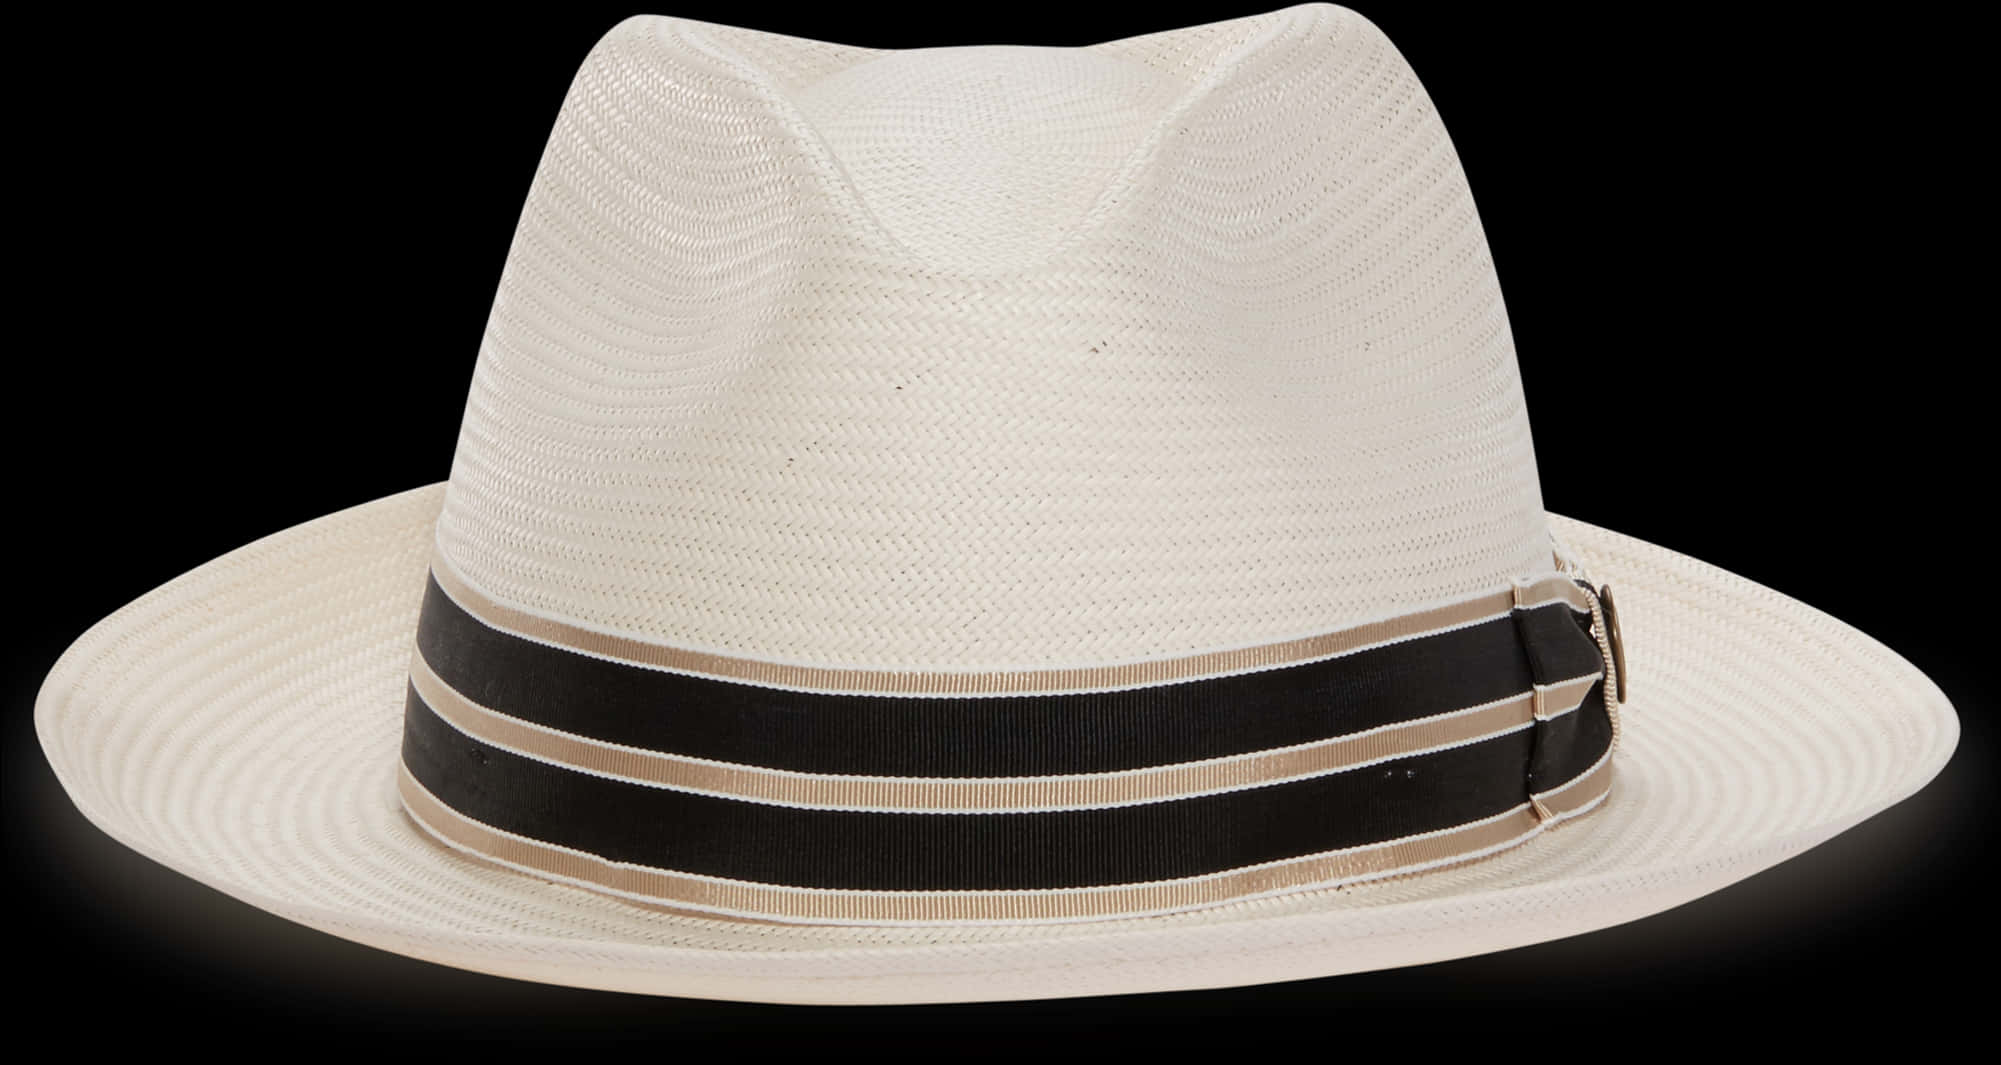 A White Hat With Black Stripes